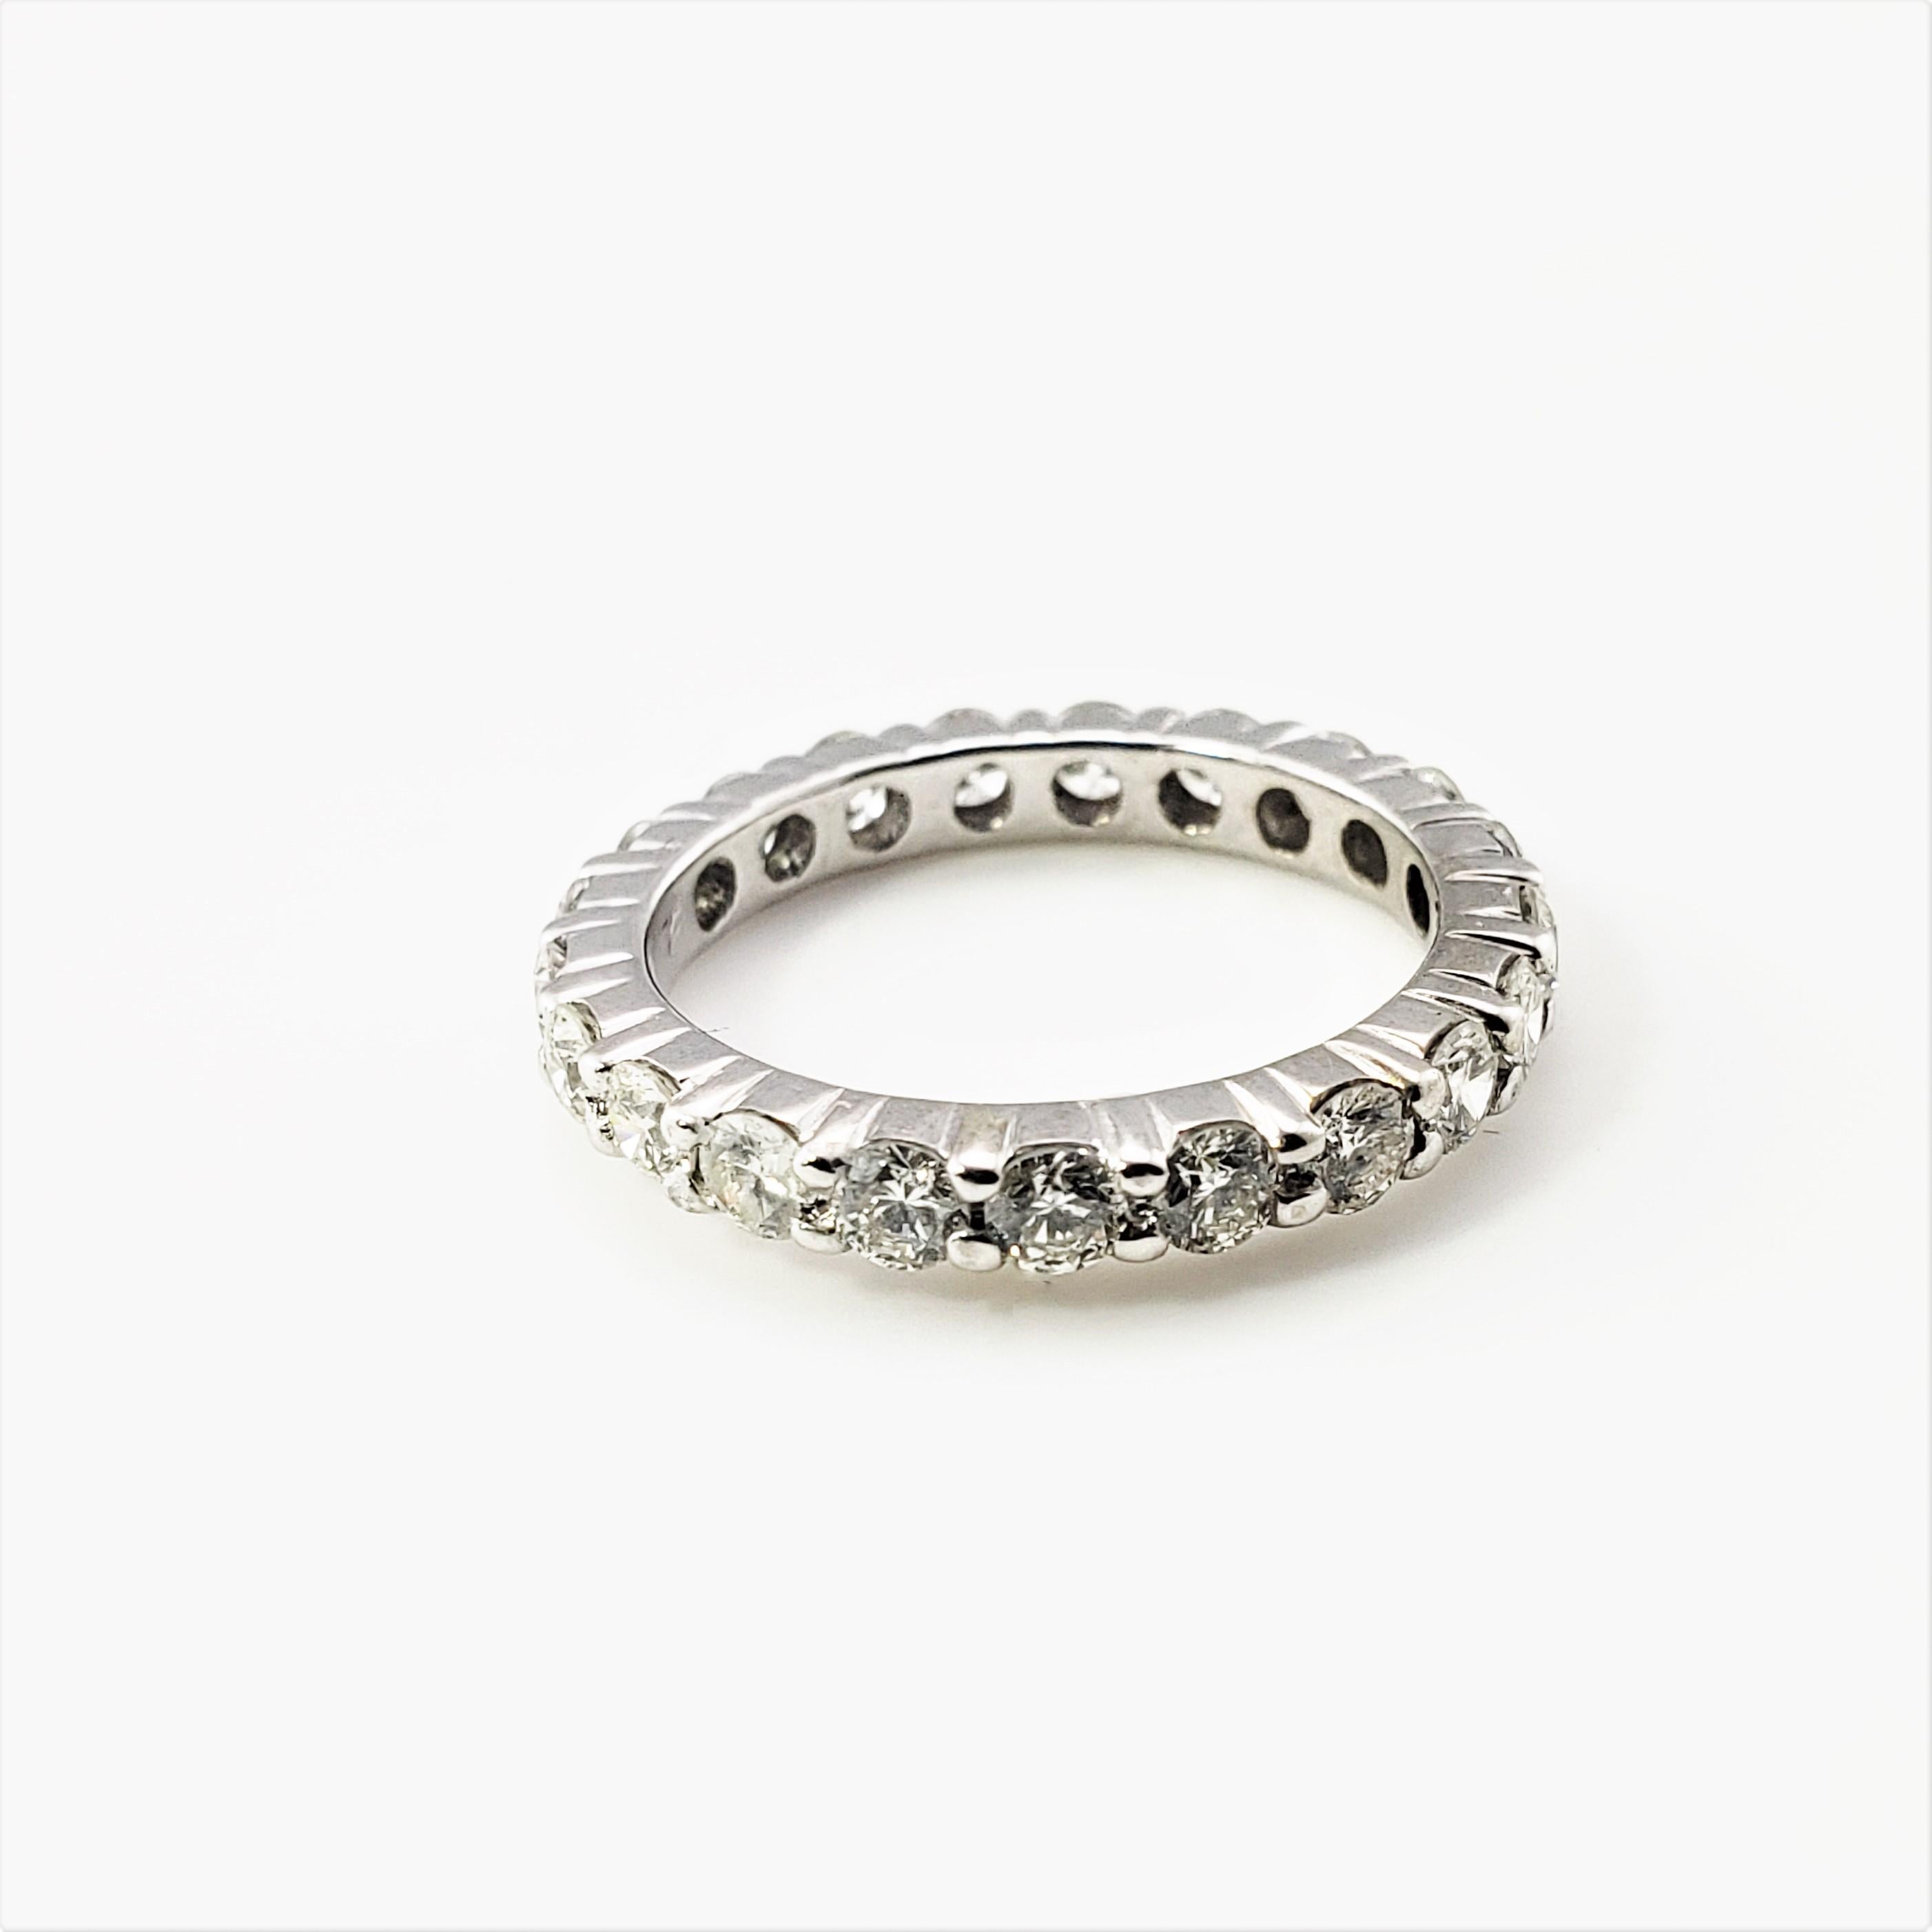 14 Karat White Gold Diamond Eternity Band Size 4.75-

This sparkling eternity band features 21 round brilliant cut diamonds set in classic 14K white gold.  Width:  3 mm.

Approximate total diamond weight:  1.47 ct.

Diamond color:  G

Diamond